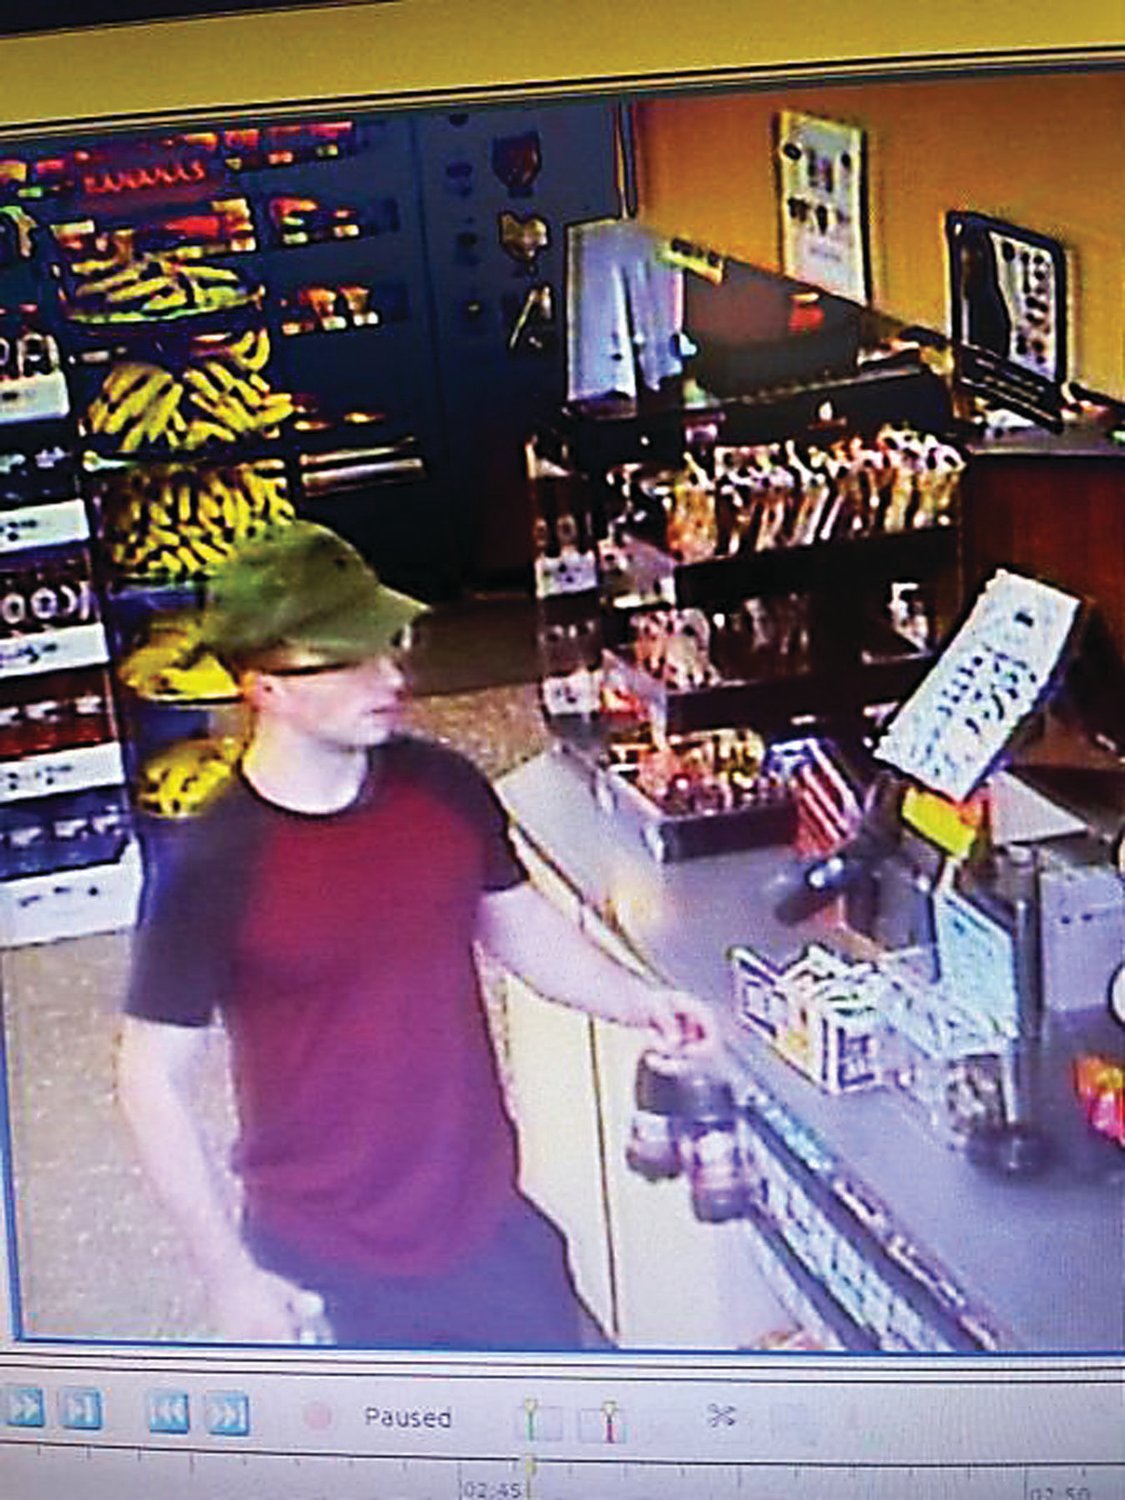 Police said this photo shows the suspect who was driving the silver SUV. Anyone with information regarding the identity of the suspect involved, is asked to contact New Hope Borough Police Department at 215-862-3033 or submit a tip via CrimeWatch.